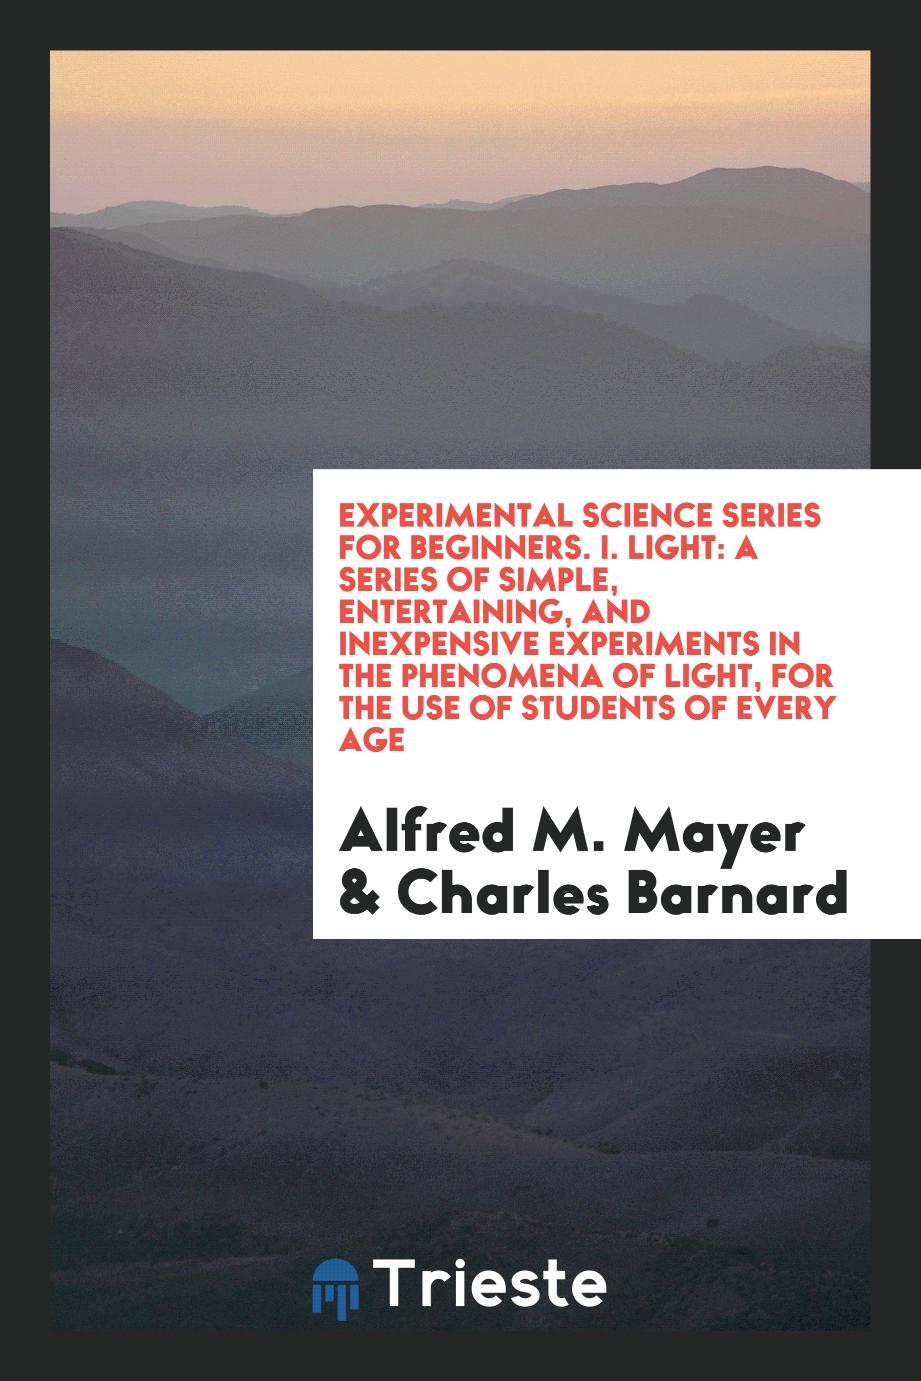 Experimental Science Series for Beginners. I. Light: A Series of Simple, Entertaining, and Inexpensive Experiments in the Phenomena of Light, for the Use of Students of Every Age